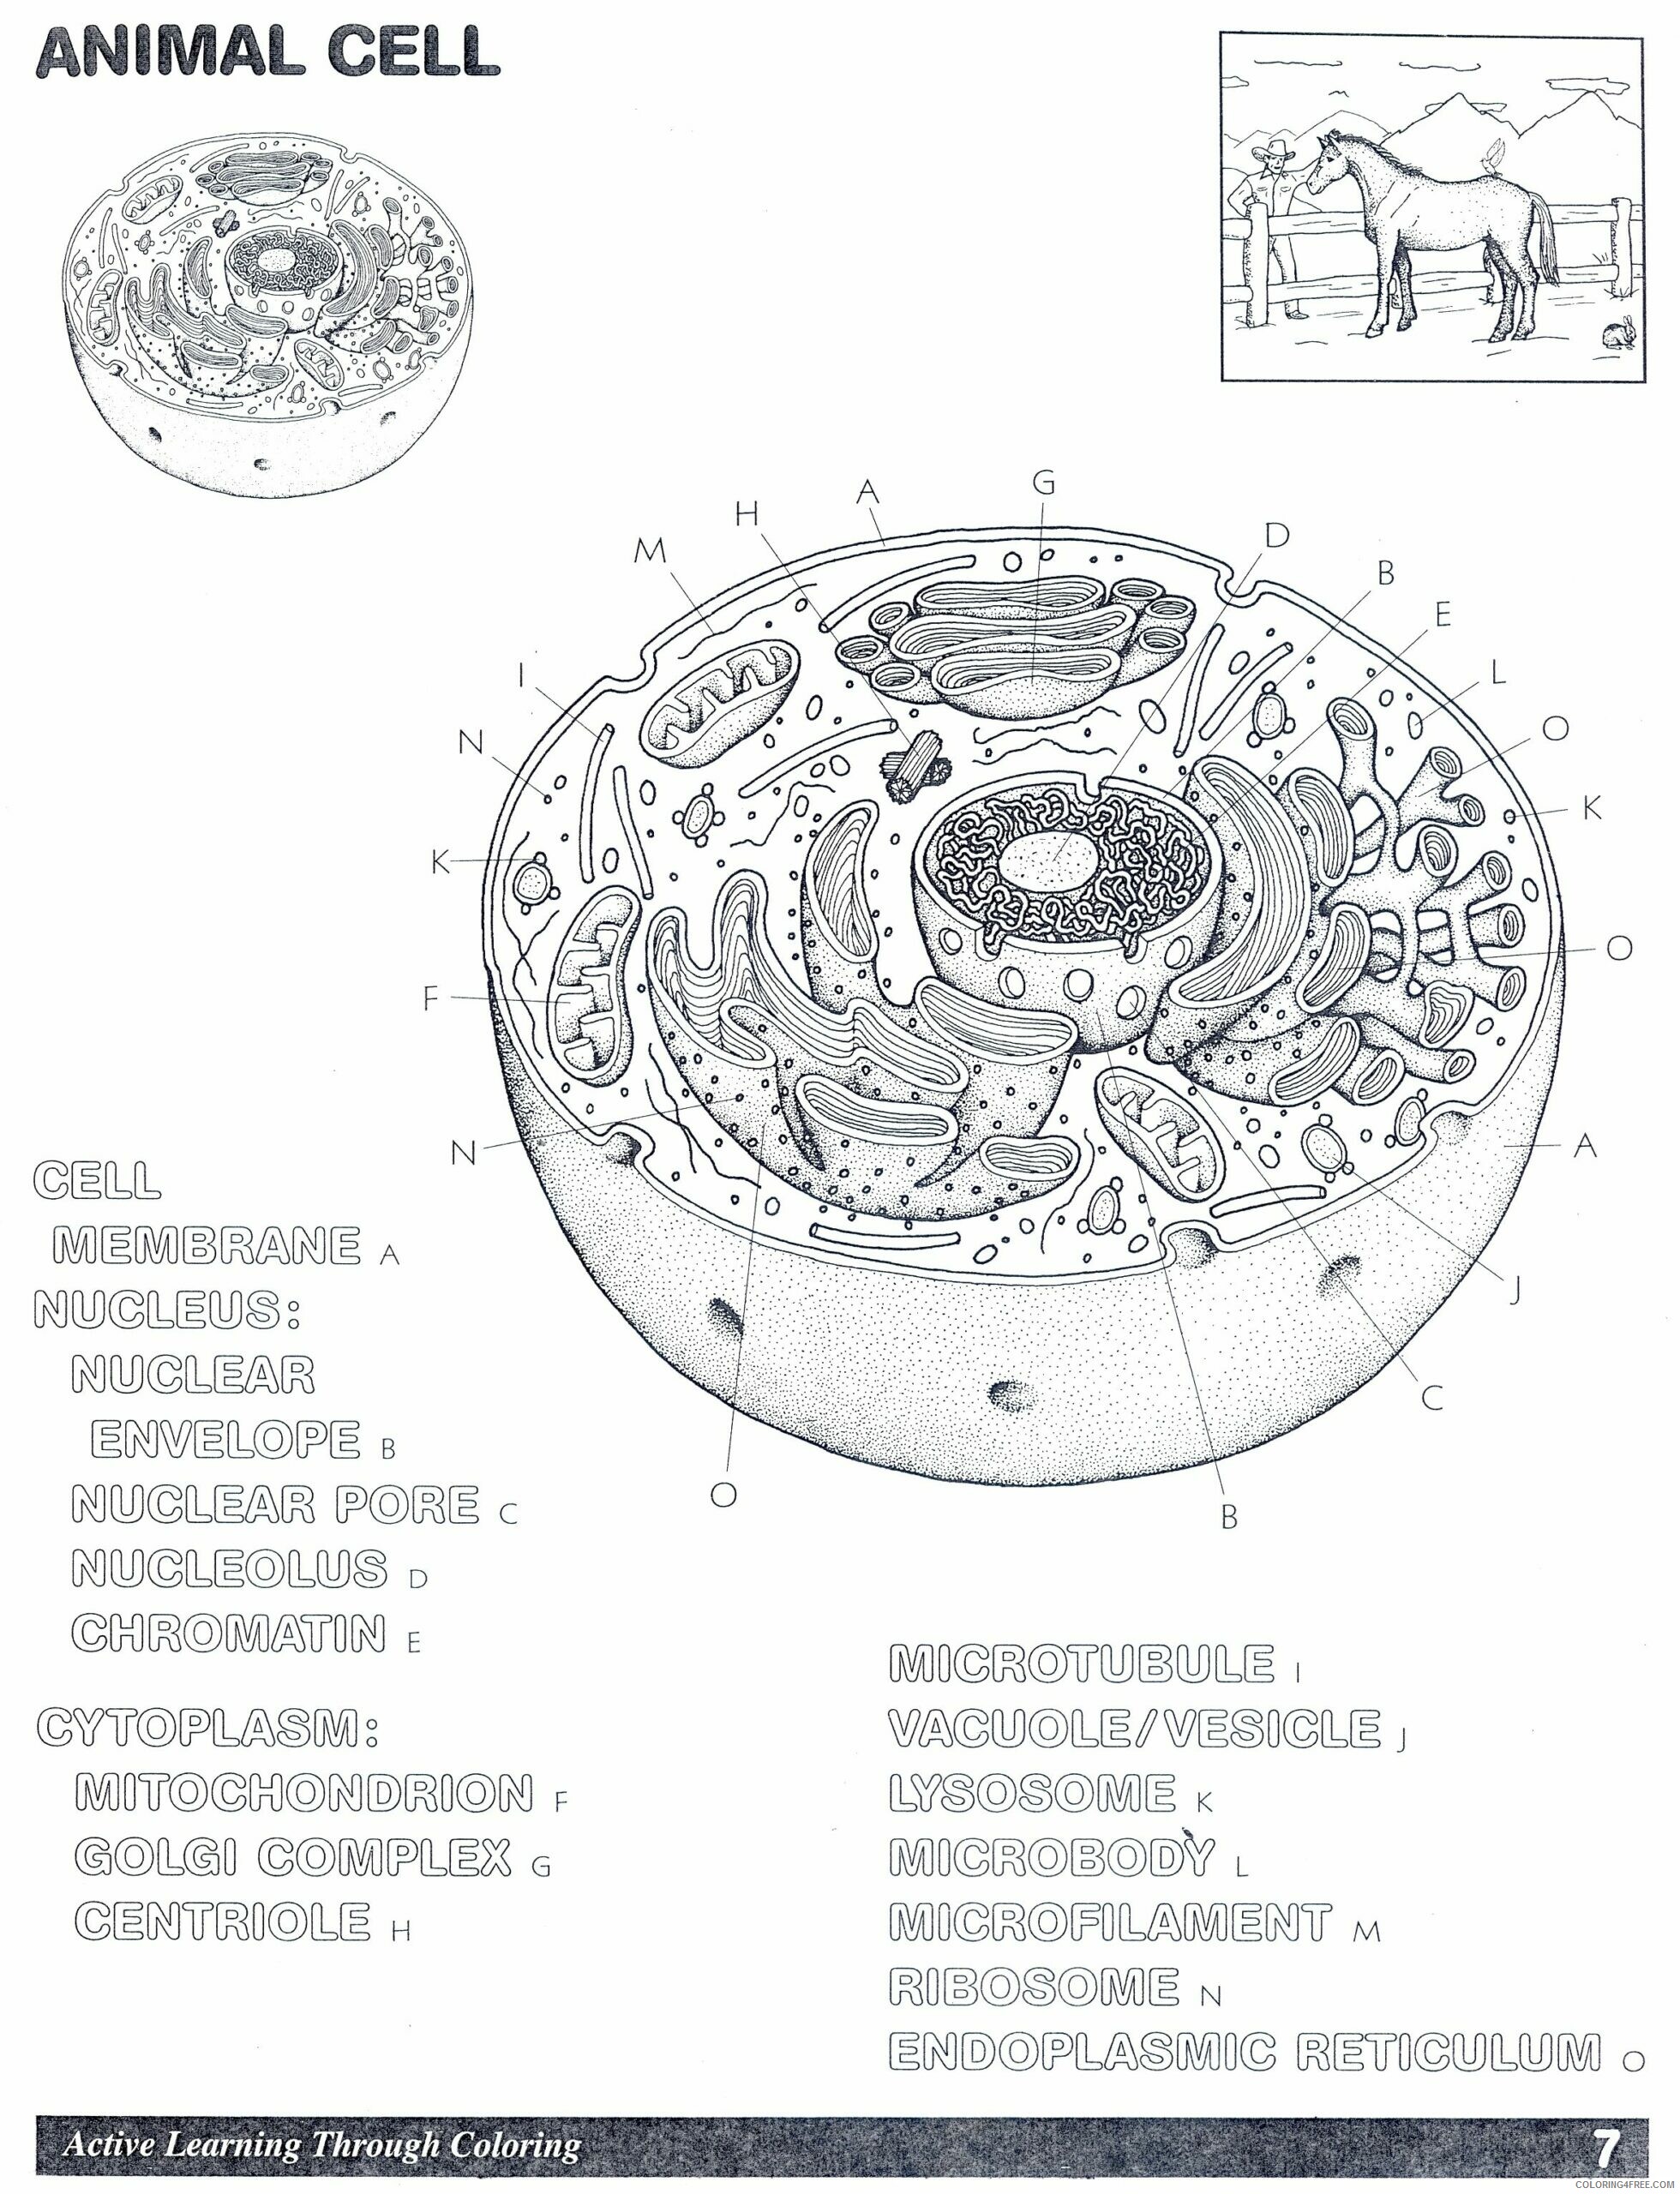 Animal Cell Coloring Page Printable Sheets animal cell jpg 2021 a 0063 Coloring4free